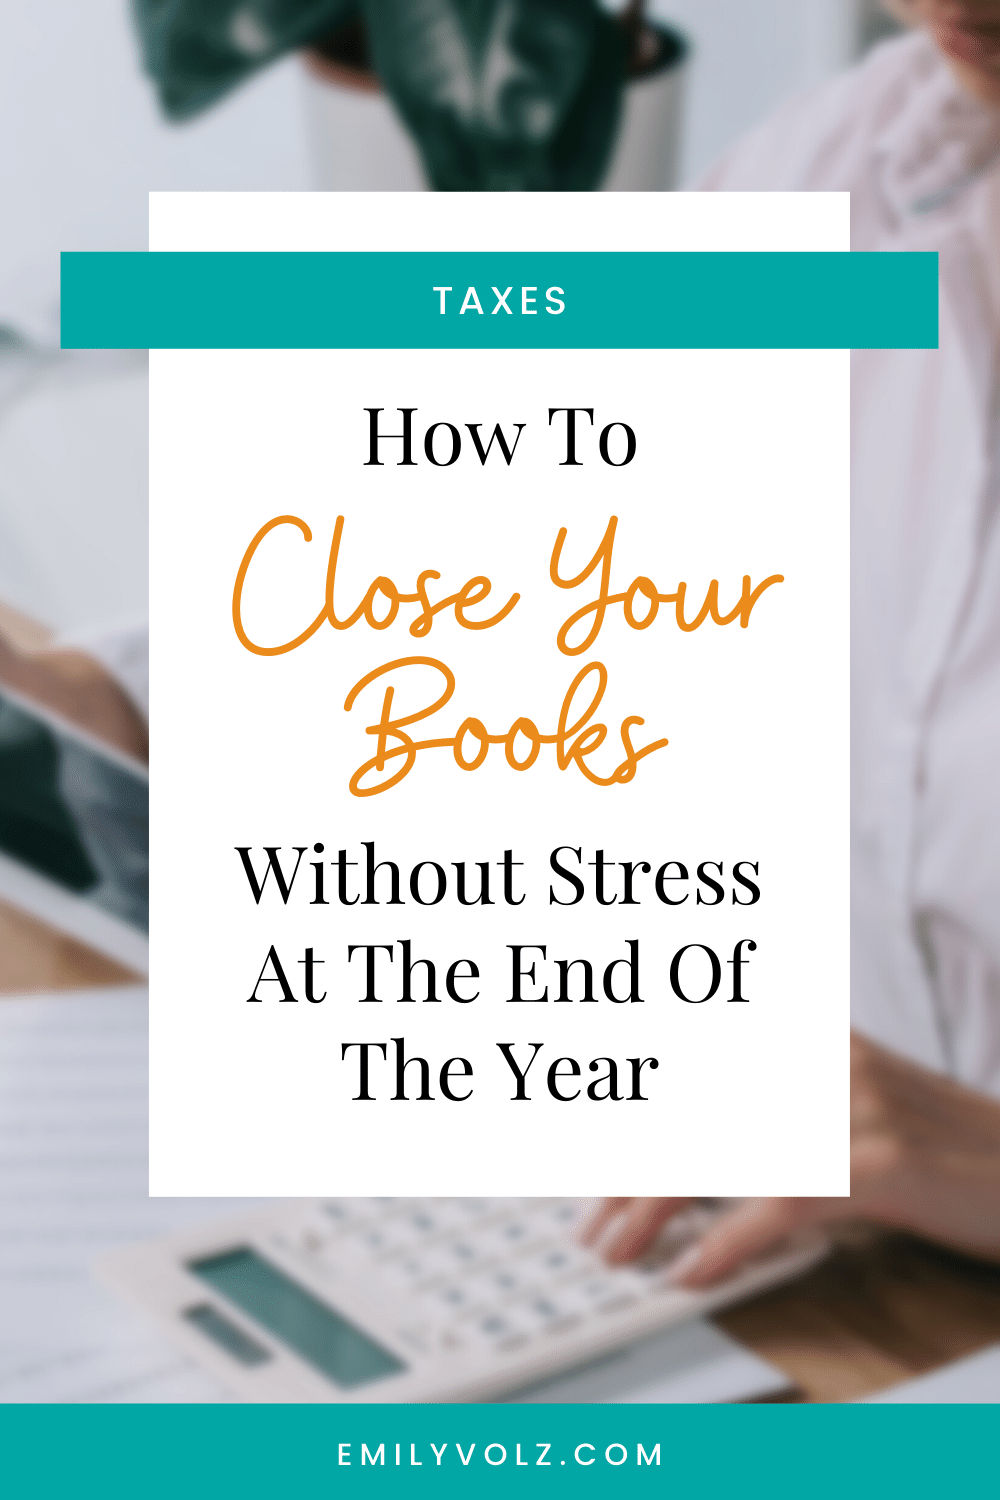 How To Close Your Books Without Stress At The End Of The Year | Emily Volz Bookkeeper & CFO